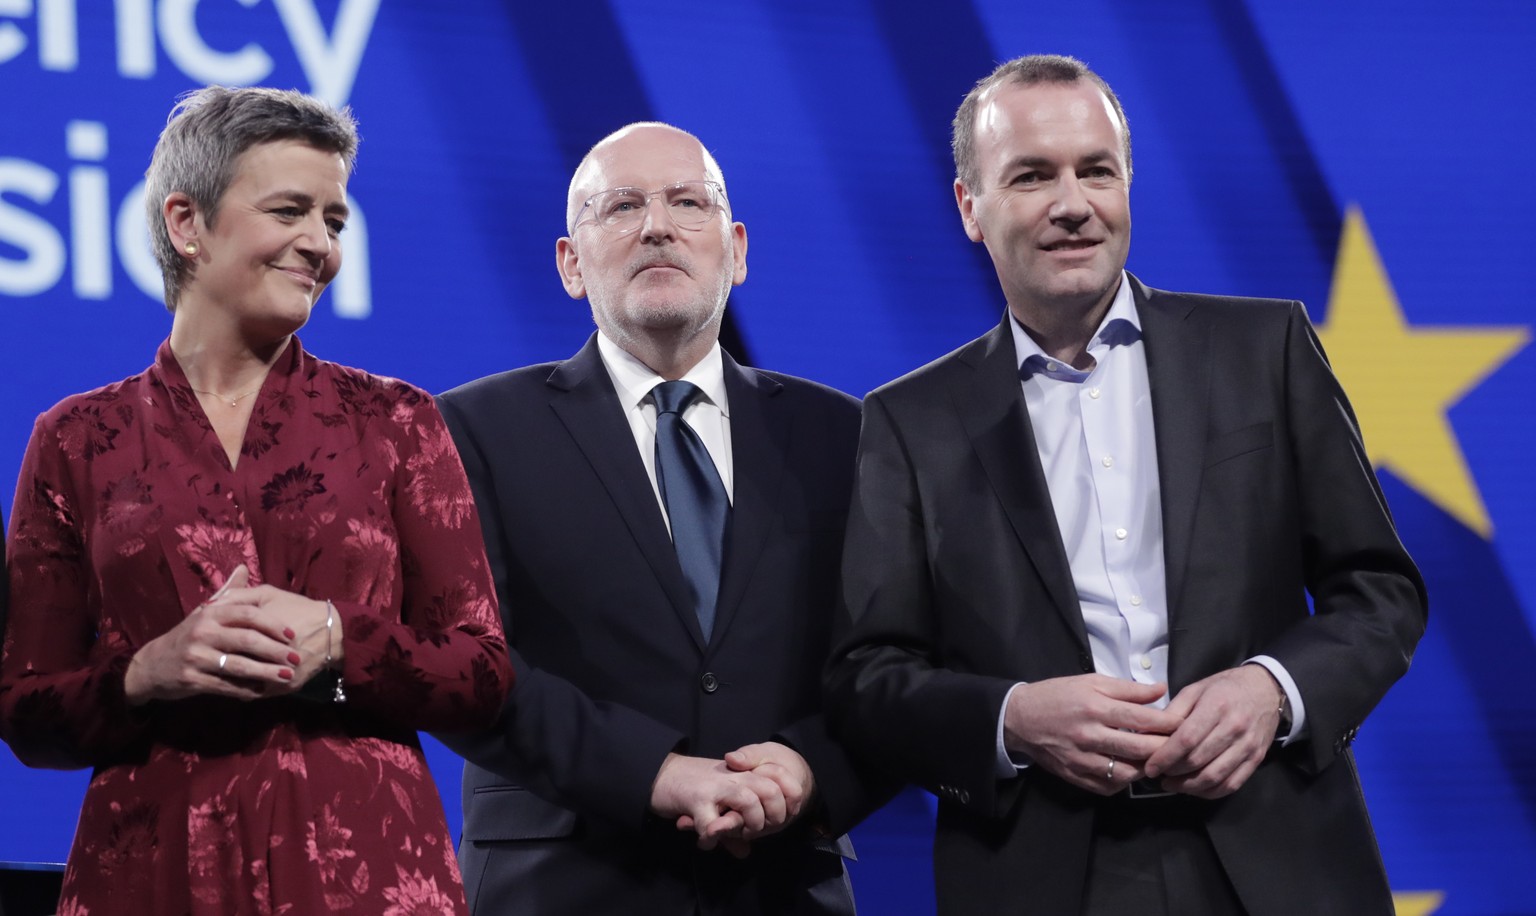 epa07573504 (L-R) Danish Margrethe Vestager of the Alliance of Liberals and Democrats for Europe (ALDE), Dutch Frans Timmermans of the Party of European Socialists (PES), German Manfred Weber of Europ ...